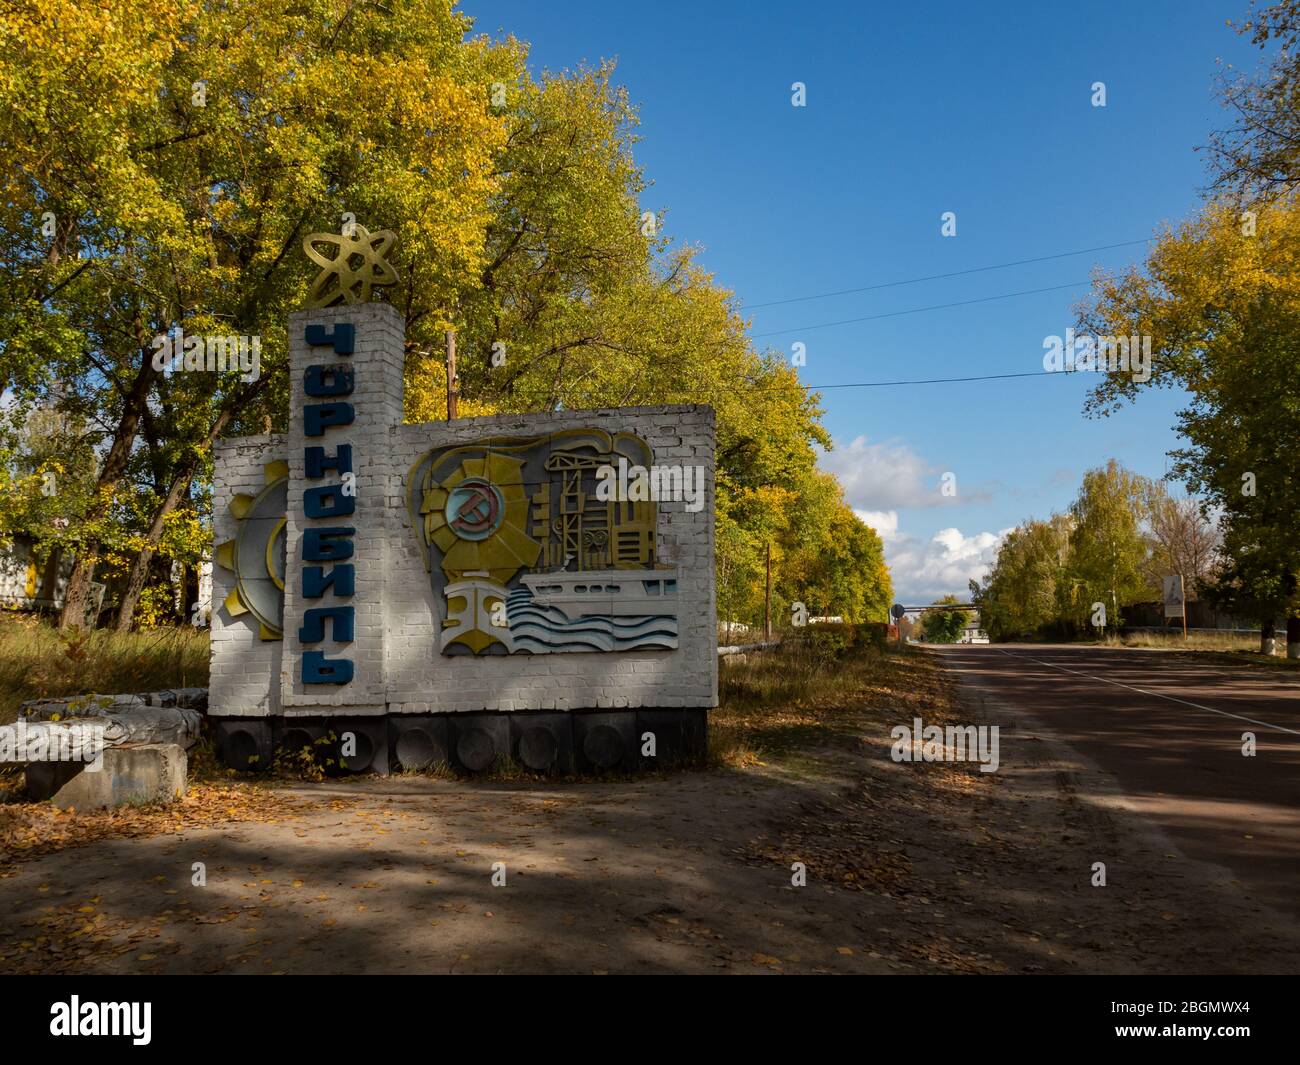 Road and town sign at the entrance of the abandoned city of Chernobyl in the Ukraine, the sign shows the name Chernobyl in Cyrillic letters in vertica Stock Photo